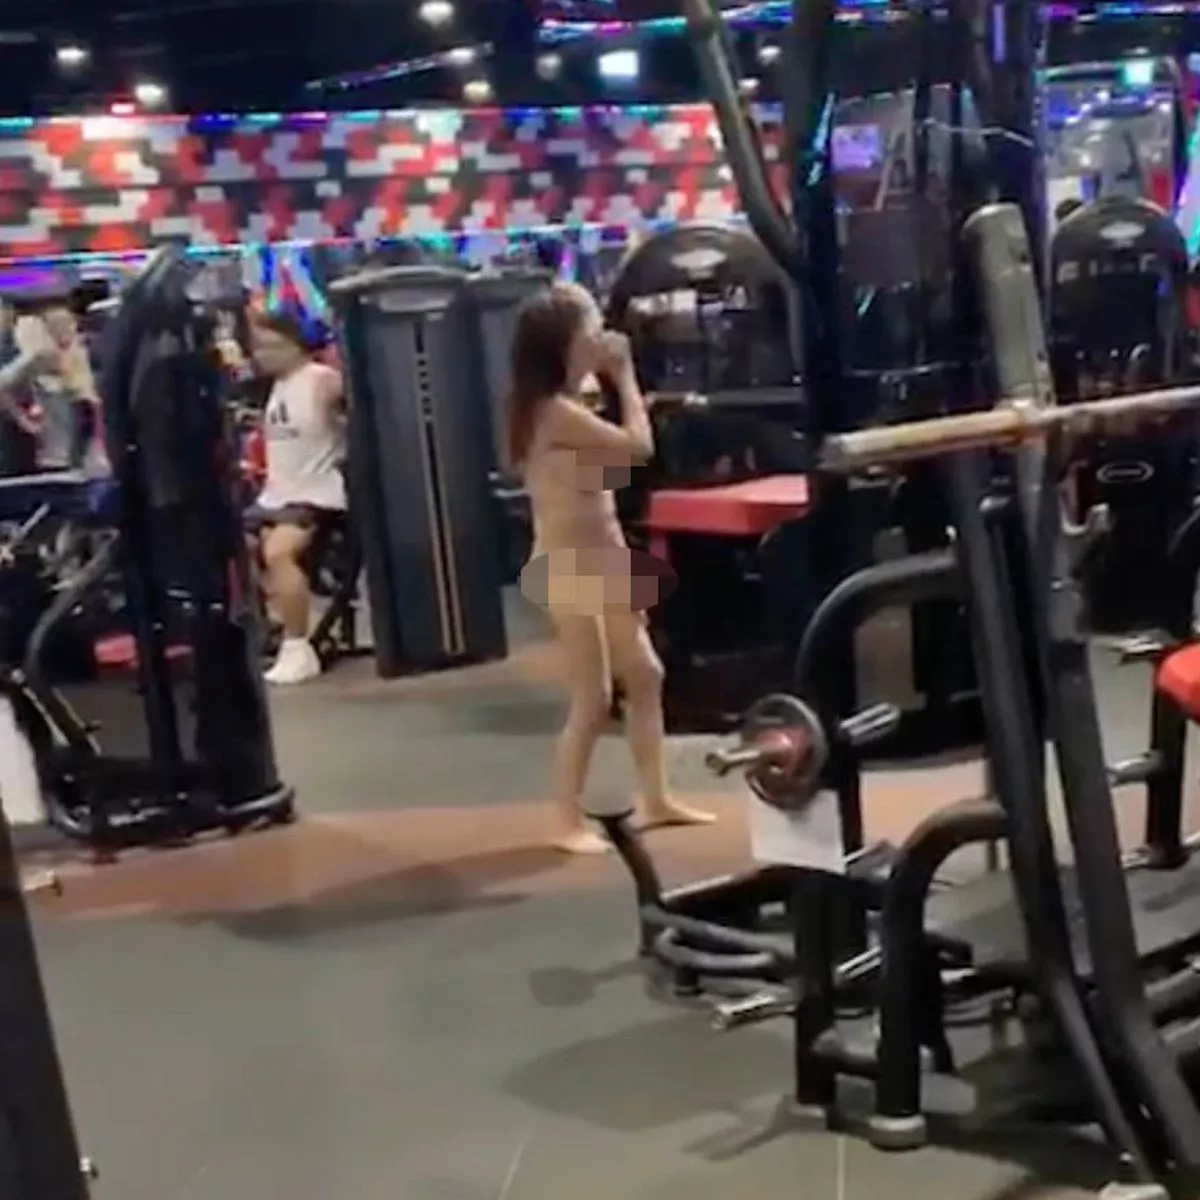 naked at the gym